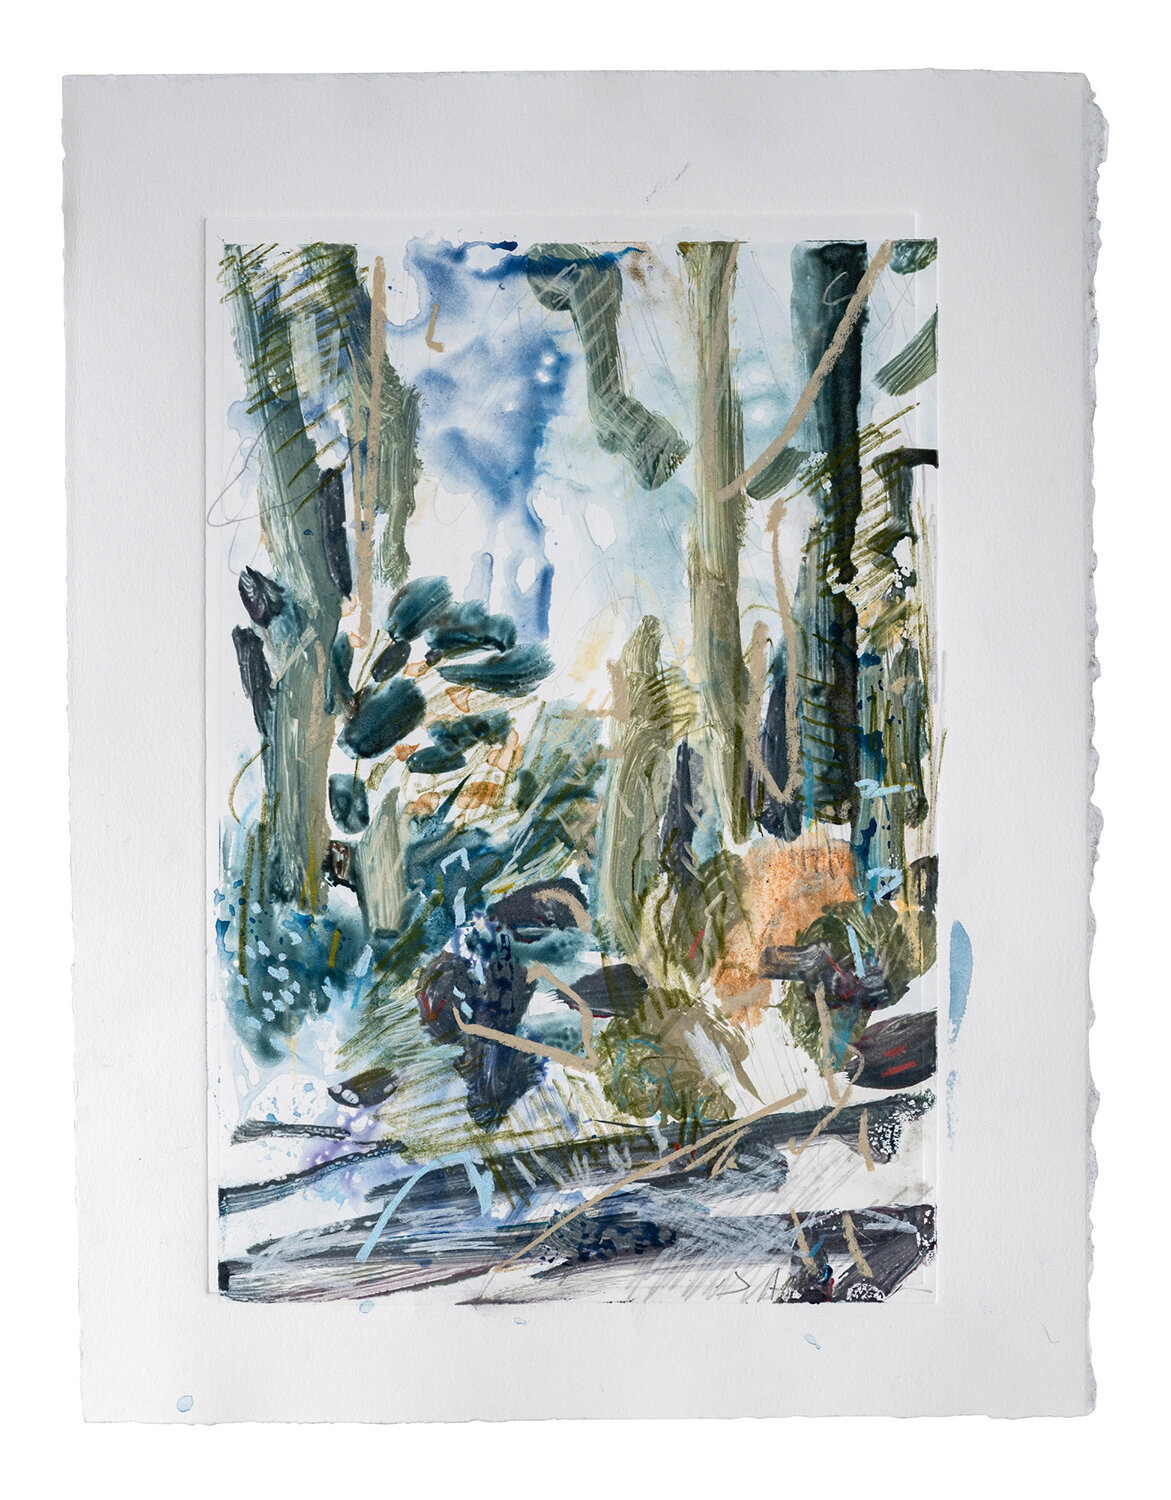   Boranup Forest No 5 , 2021  55 x 44 cm watercolour monoprint with pastel and pencil on paper  Collected 